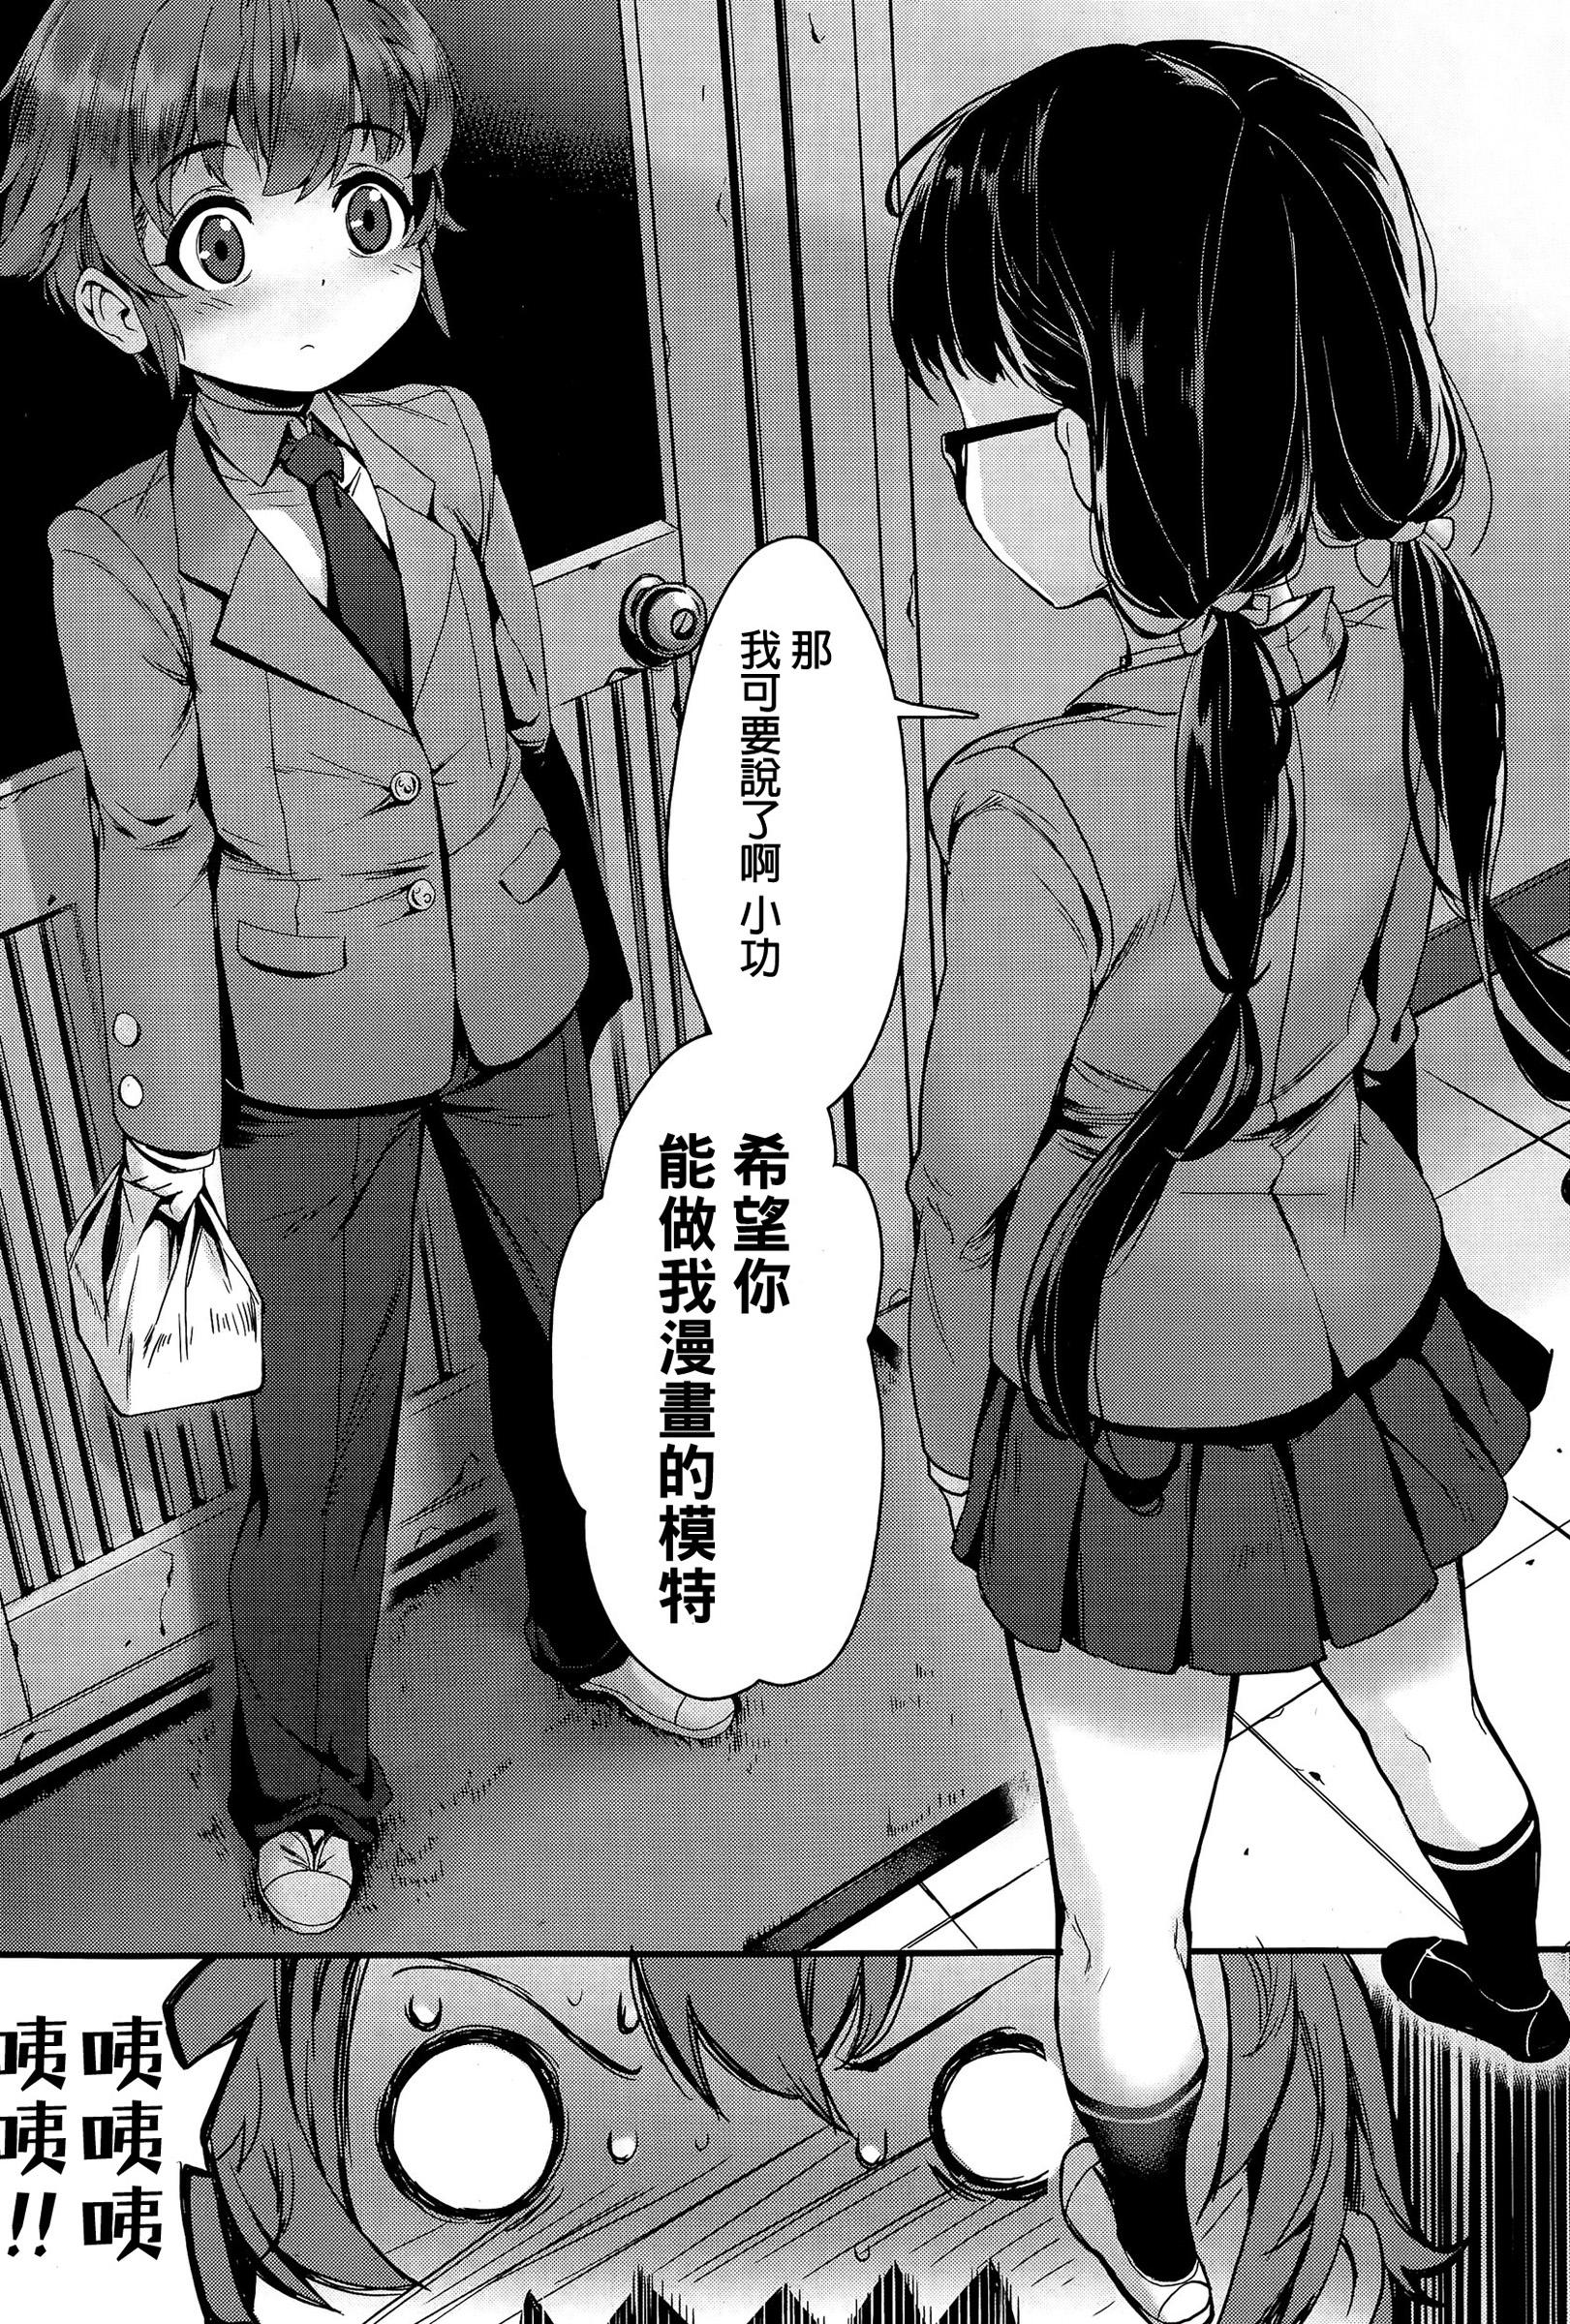 Man Model ni Natte Hoshii - I want you to become a model Highheels - Page 6